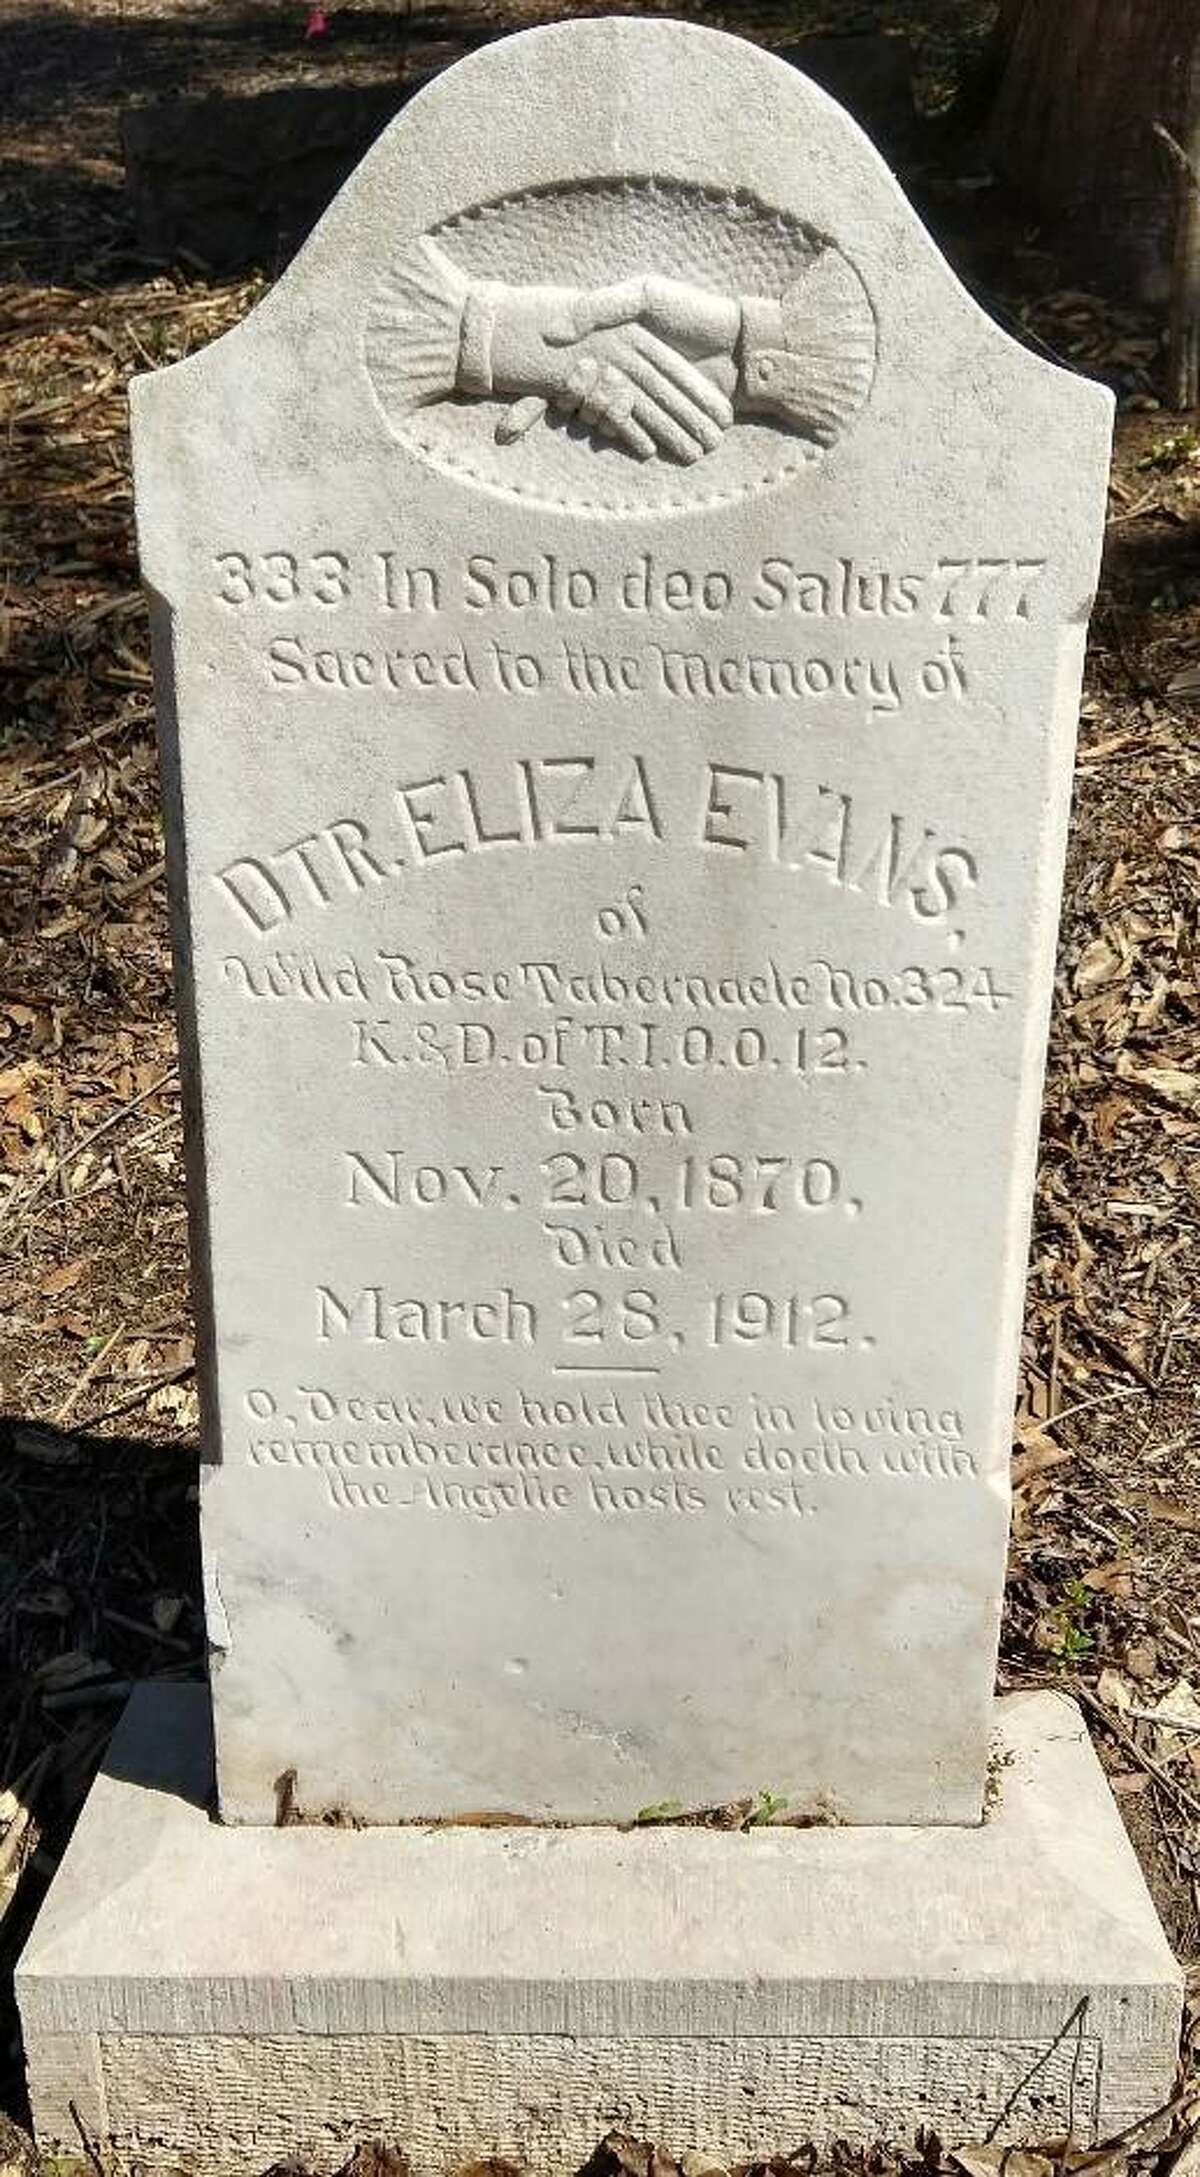 The gravestone of Eliza Evans at the Conroe Community Cemetery. The CCCRP is looking for more information about her from ancestors.